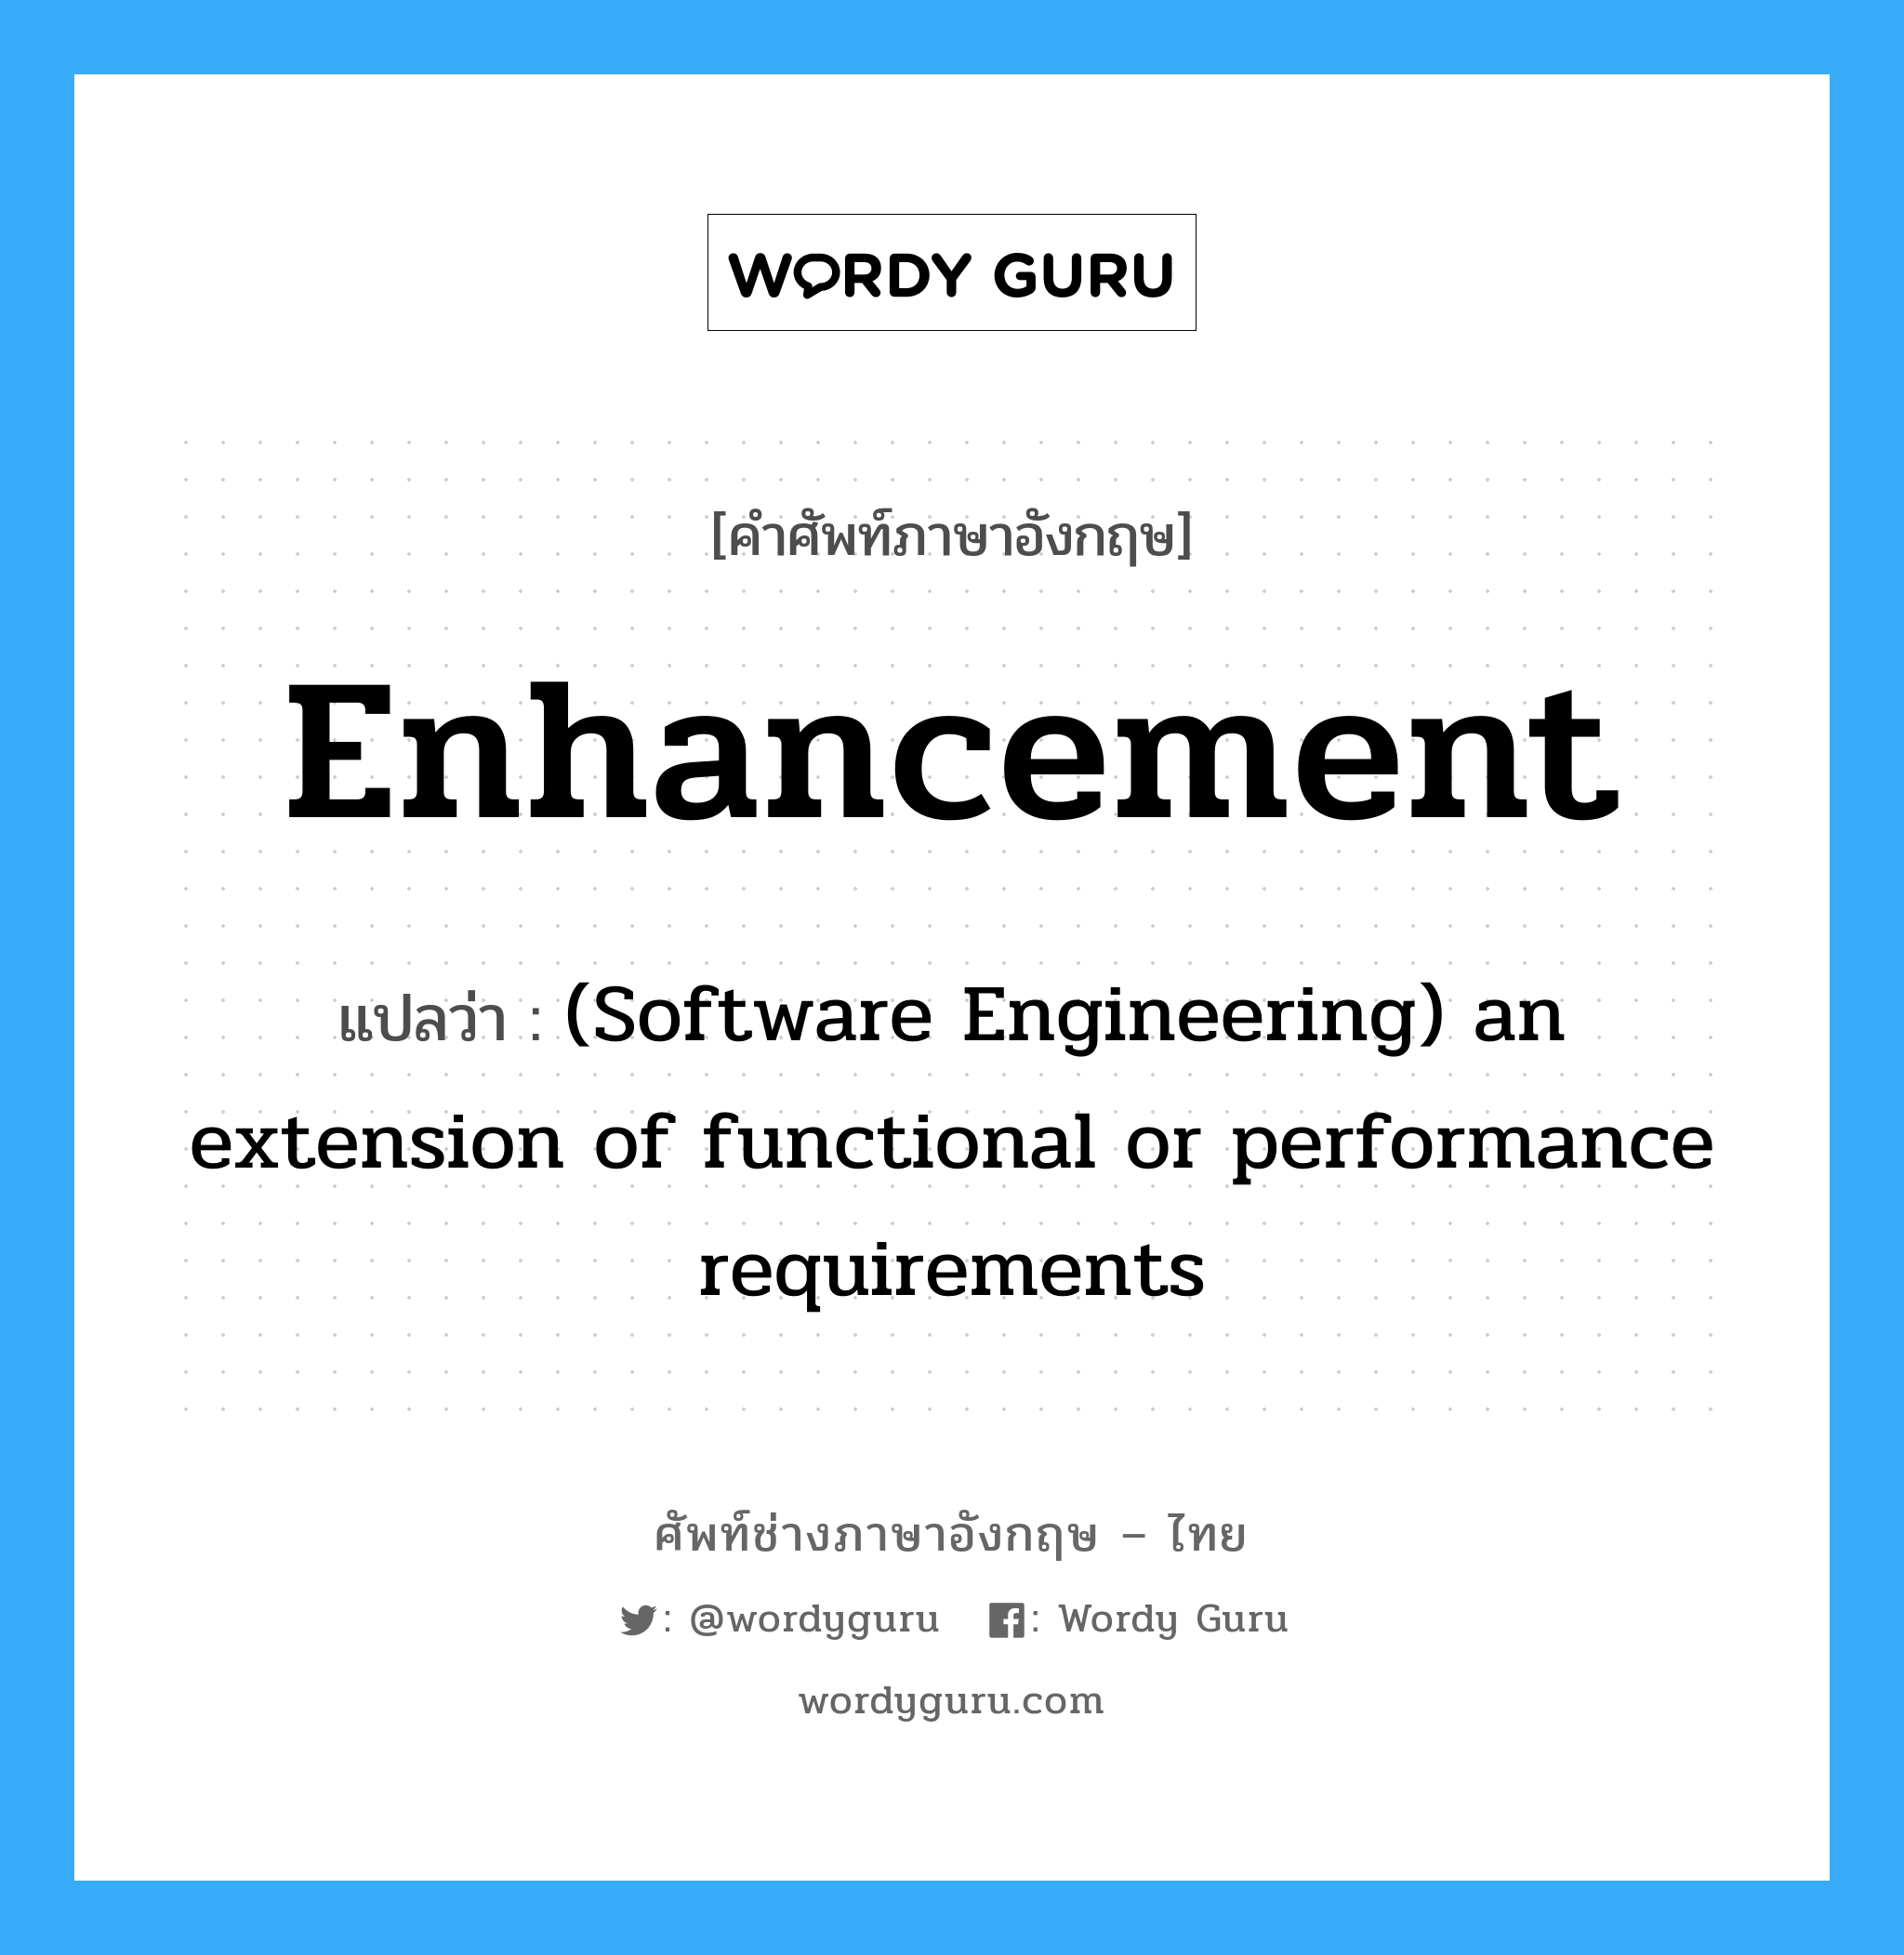 Enhancement แปลว่า?, คำศัพท์ช่างภาษาอังกฤษ - ไทย Enhancement คำศัพท์ภาษาอังกฤษ Enhancement แปลว่า (Software Engineering) an extension of functional or performance requirements